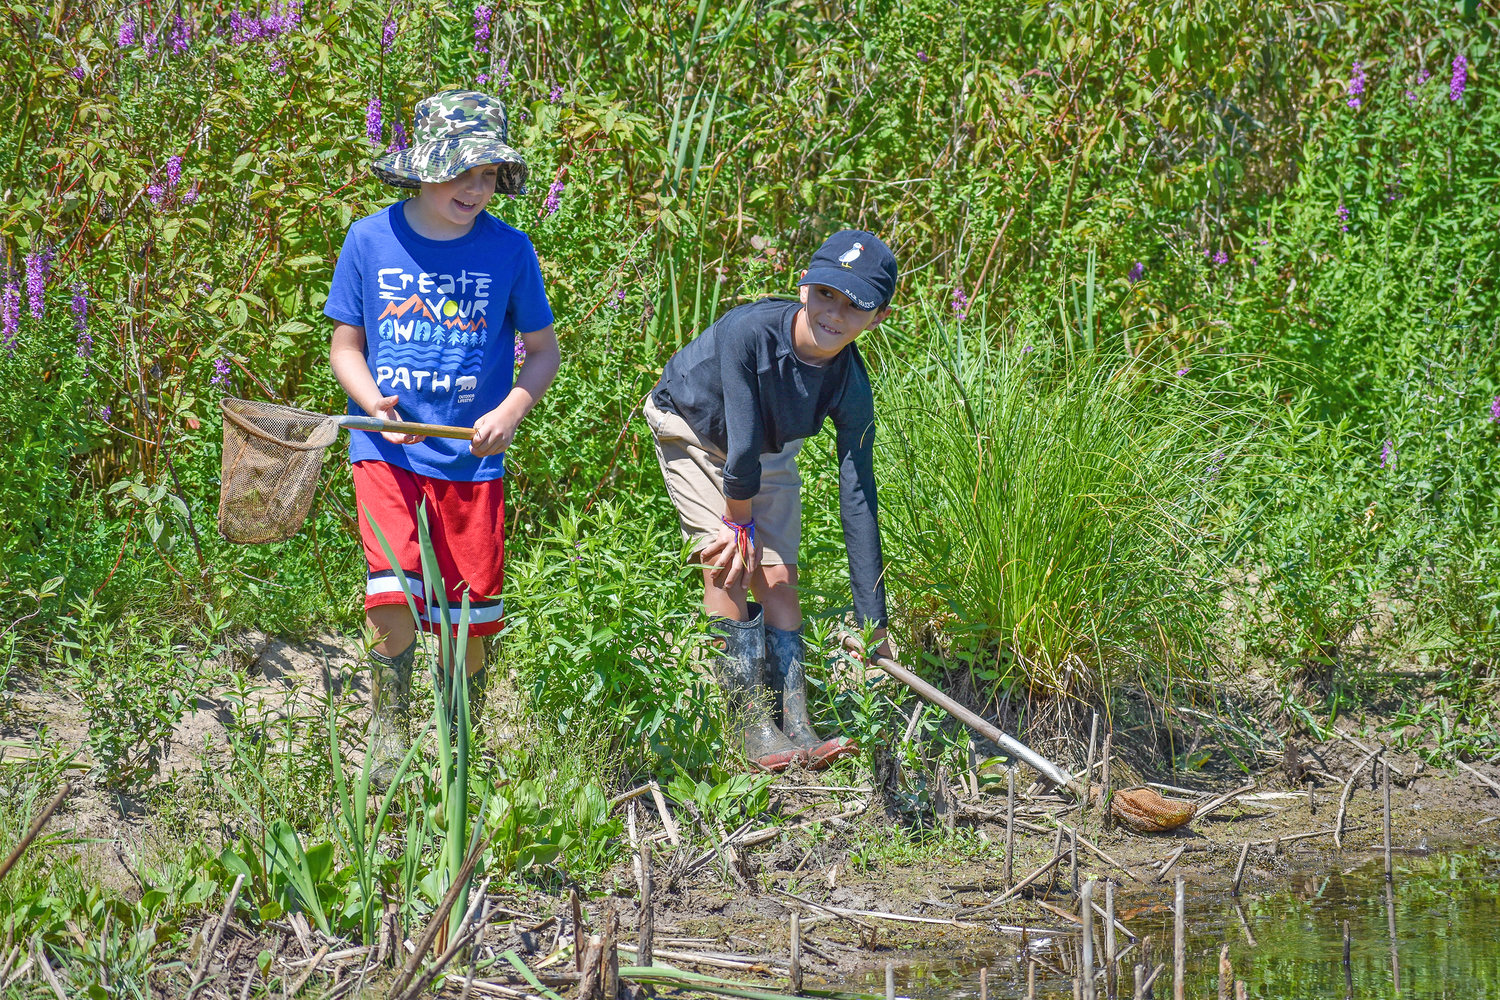 Ethan Lawrence (left), age seven, and Lochlan Fuller (right), age eight, explore the rim of the pond at the Great Swamp Conservancy.